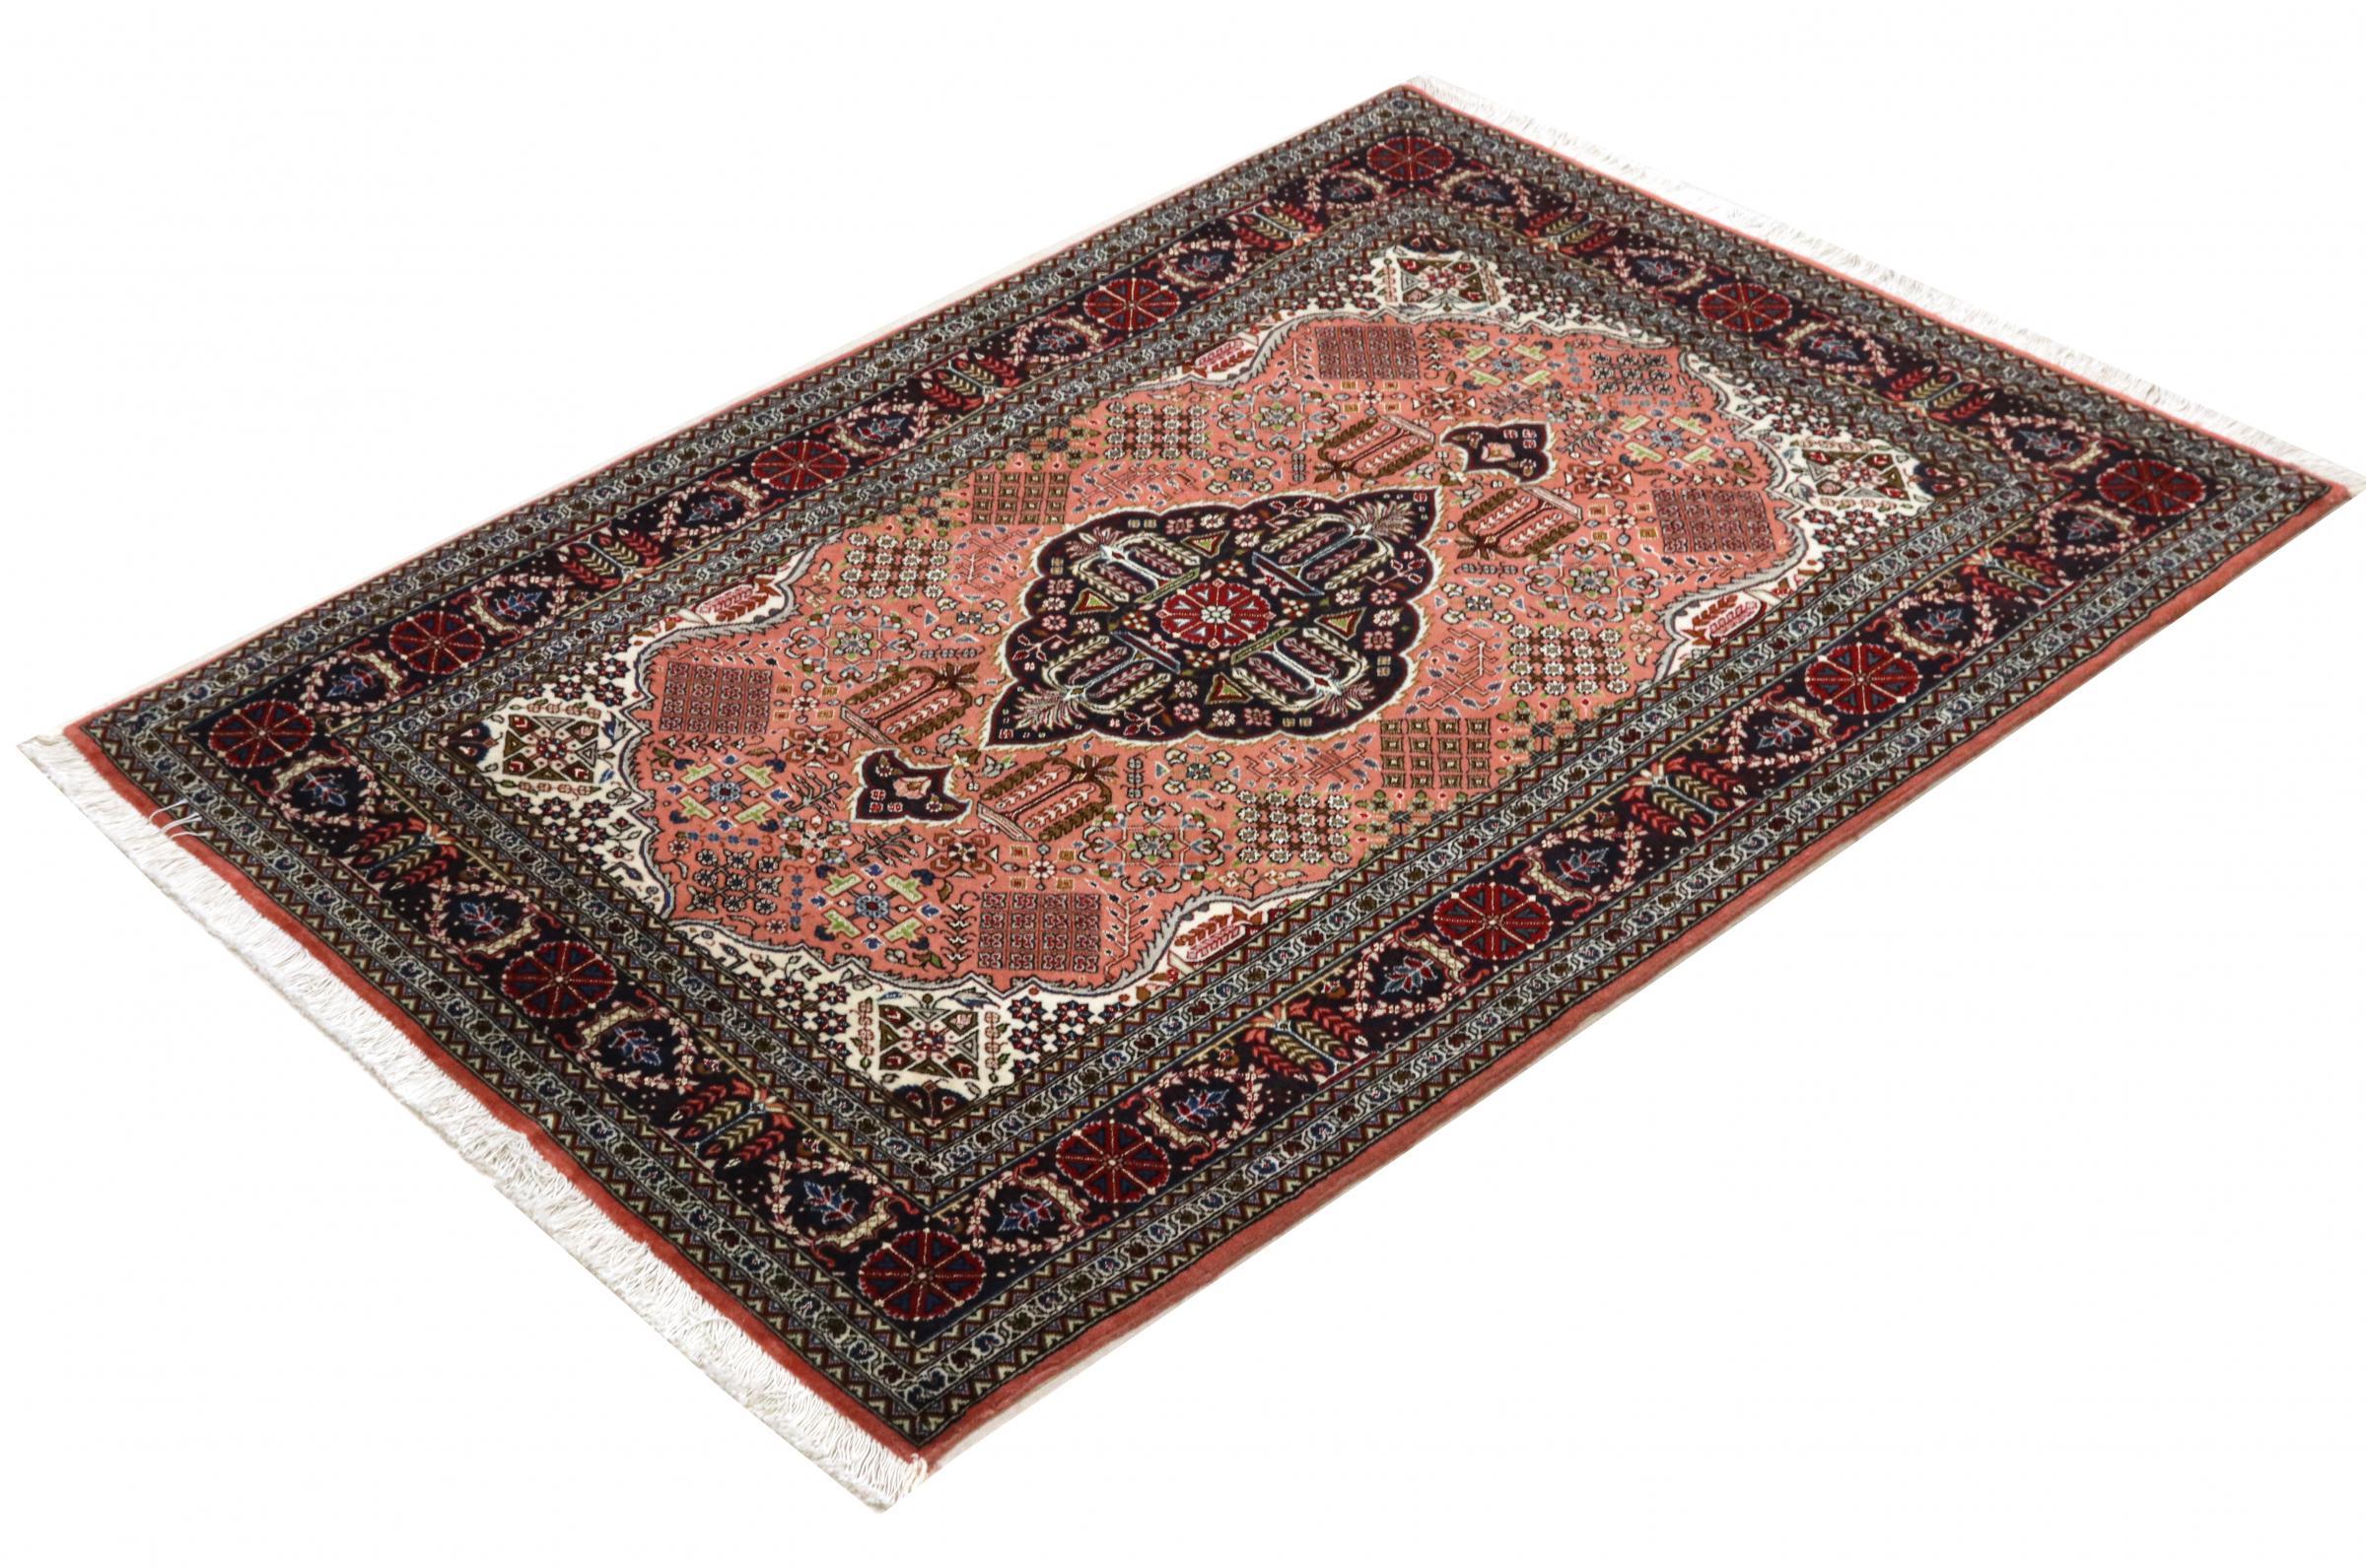 A gorgeous Persian rug, Tabriz, 20th century. 

This rug has been crafted in oldest craftsmanship to a piece of sophisticated quality. 50Raj rugs possess a fine level of knot density. This Tabriz has been crafted from soft sheep wool in